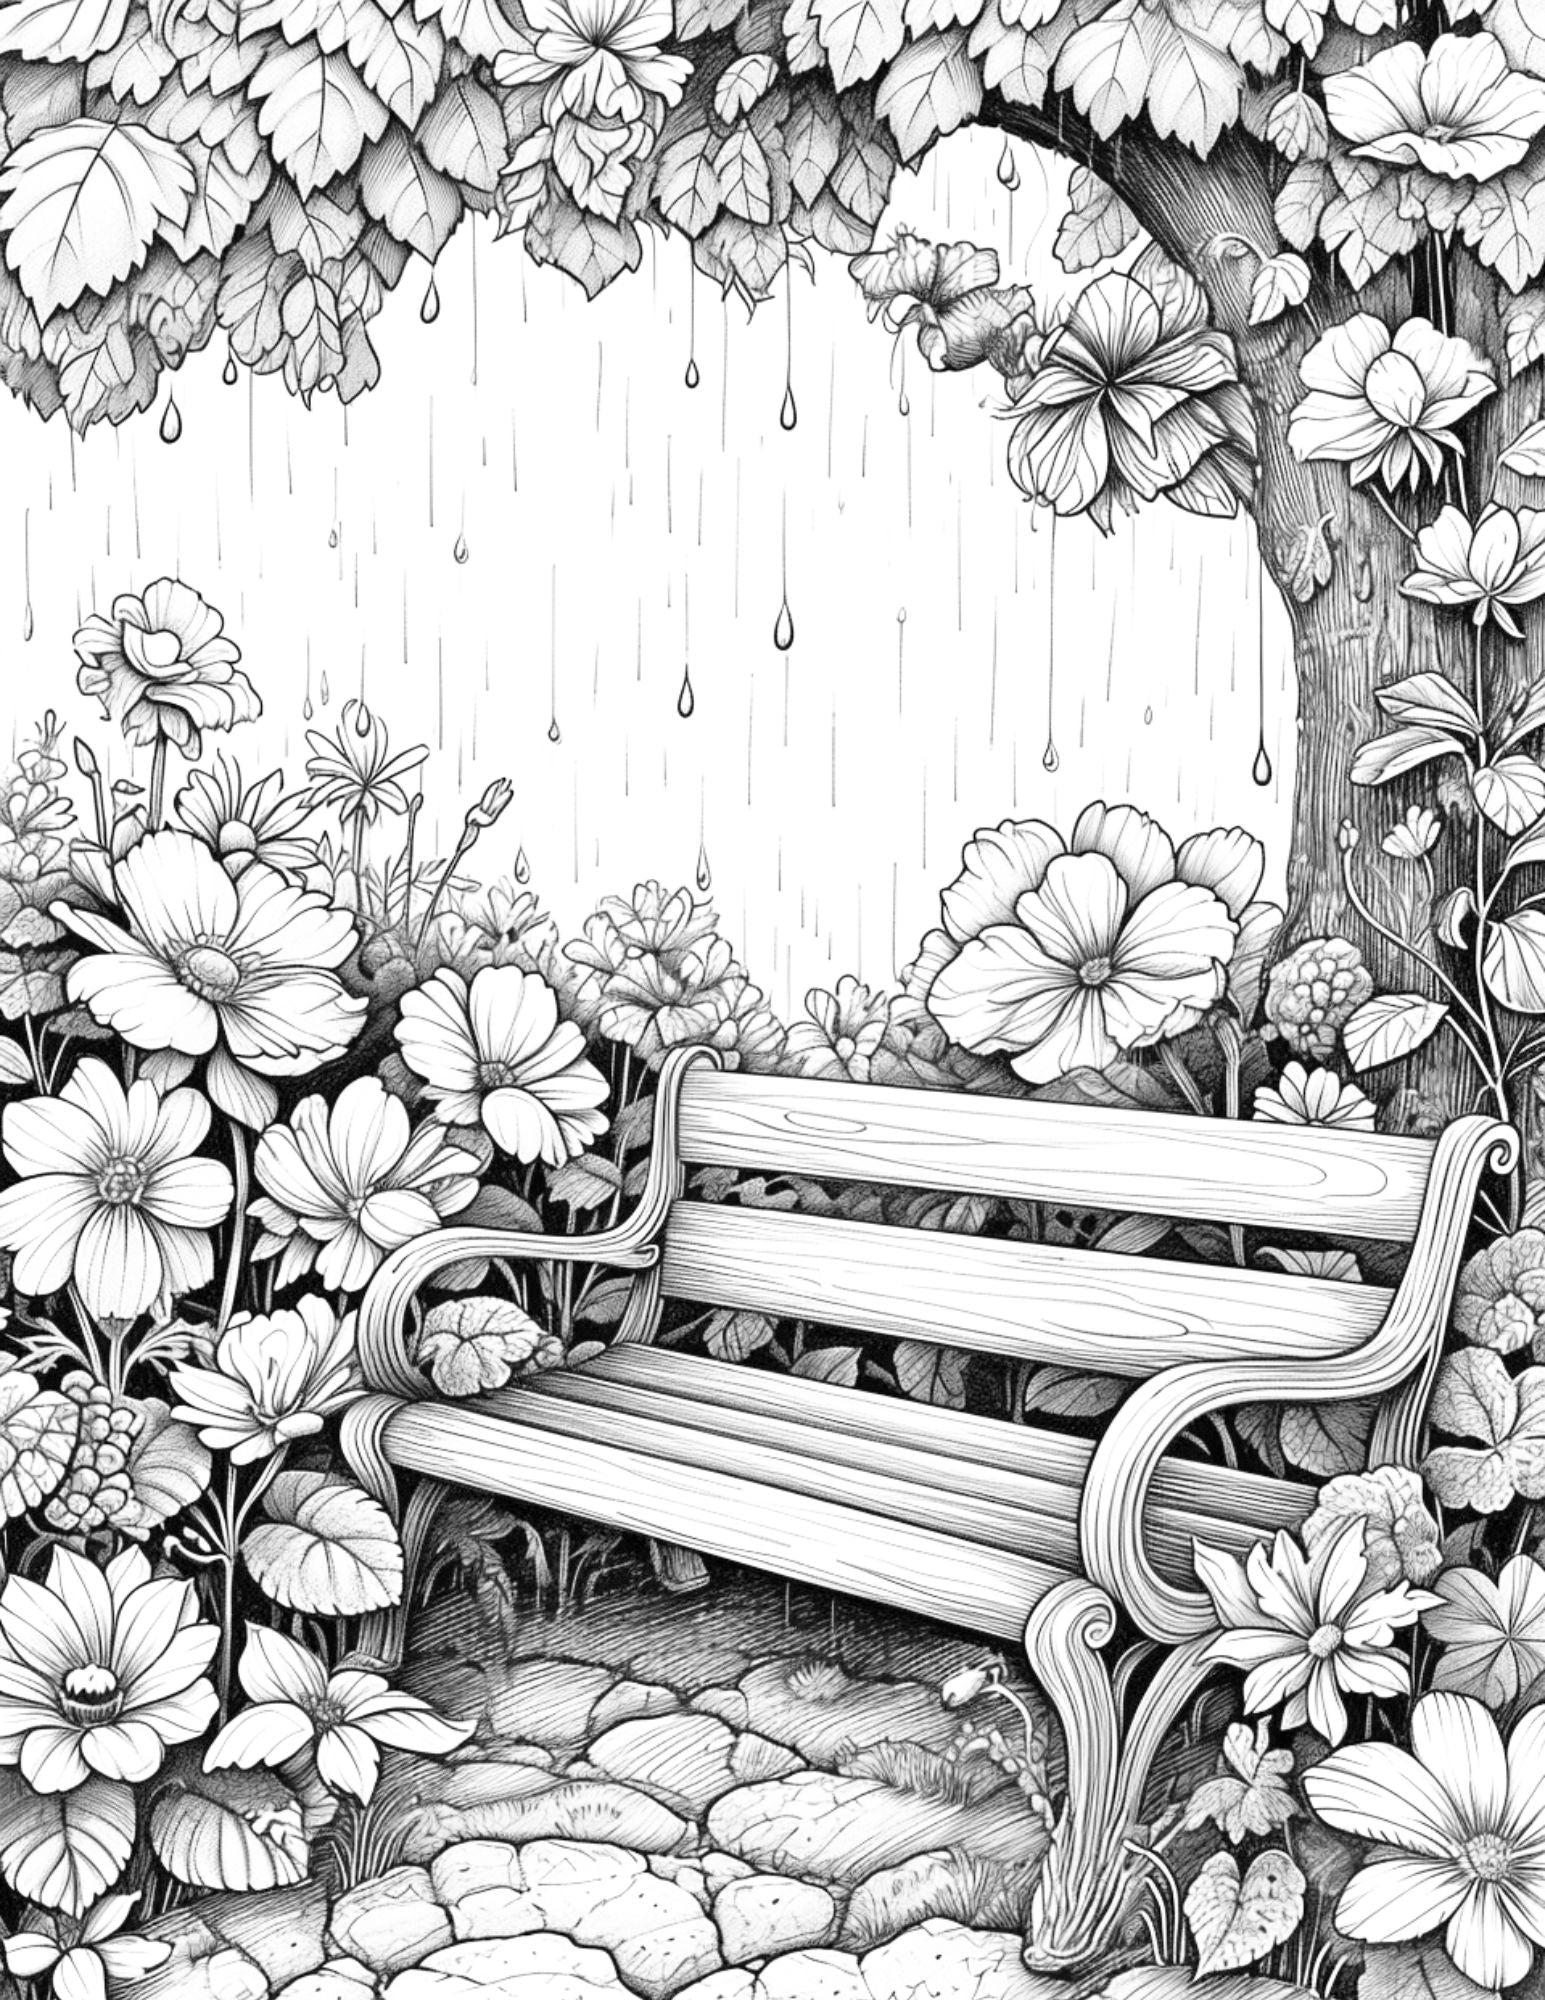 adult coloring pages, adult coloring sheets, adult coloring book pdf, adult coloring book printable, grayscale coloring pages, grayscale coloring books, spring coloring pages for adults, spring coloring book, grayscale illustration, free adult coloring pages